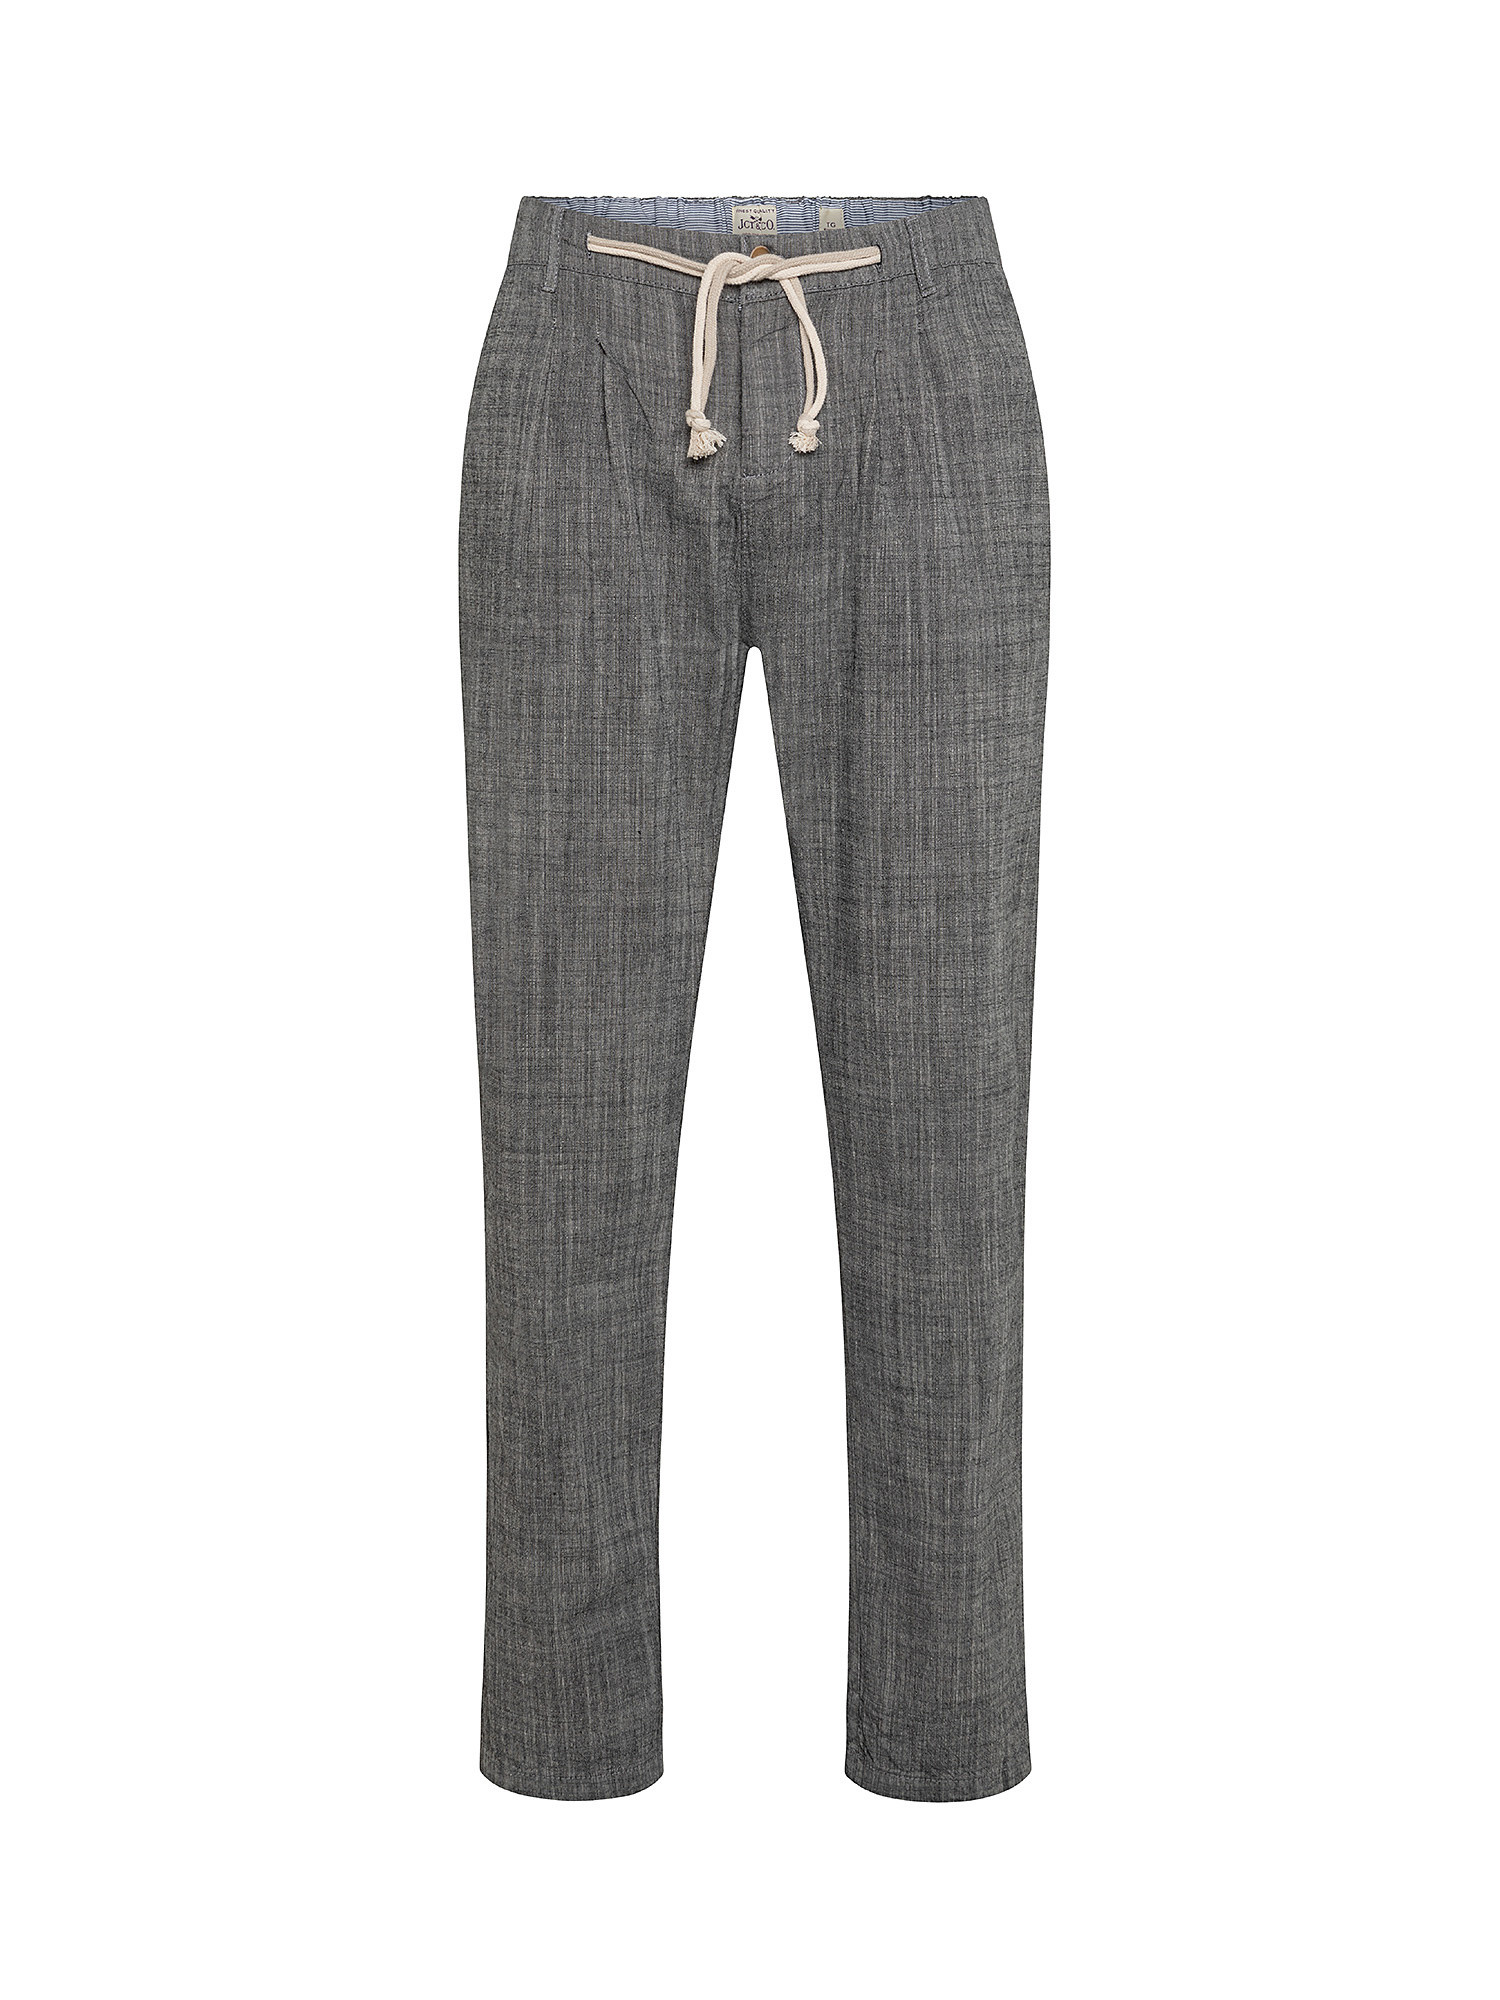 Pantalone con coulisse, Grigio, large image number 0